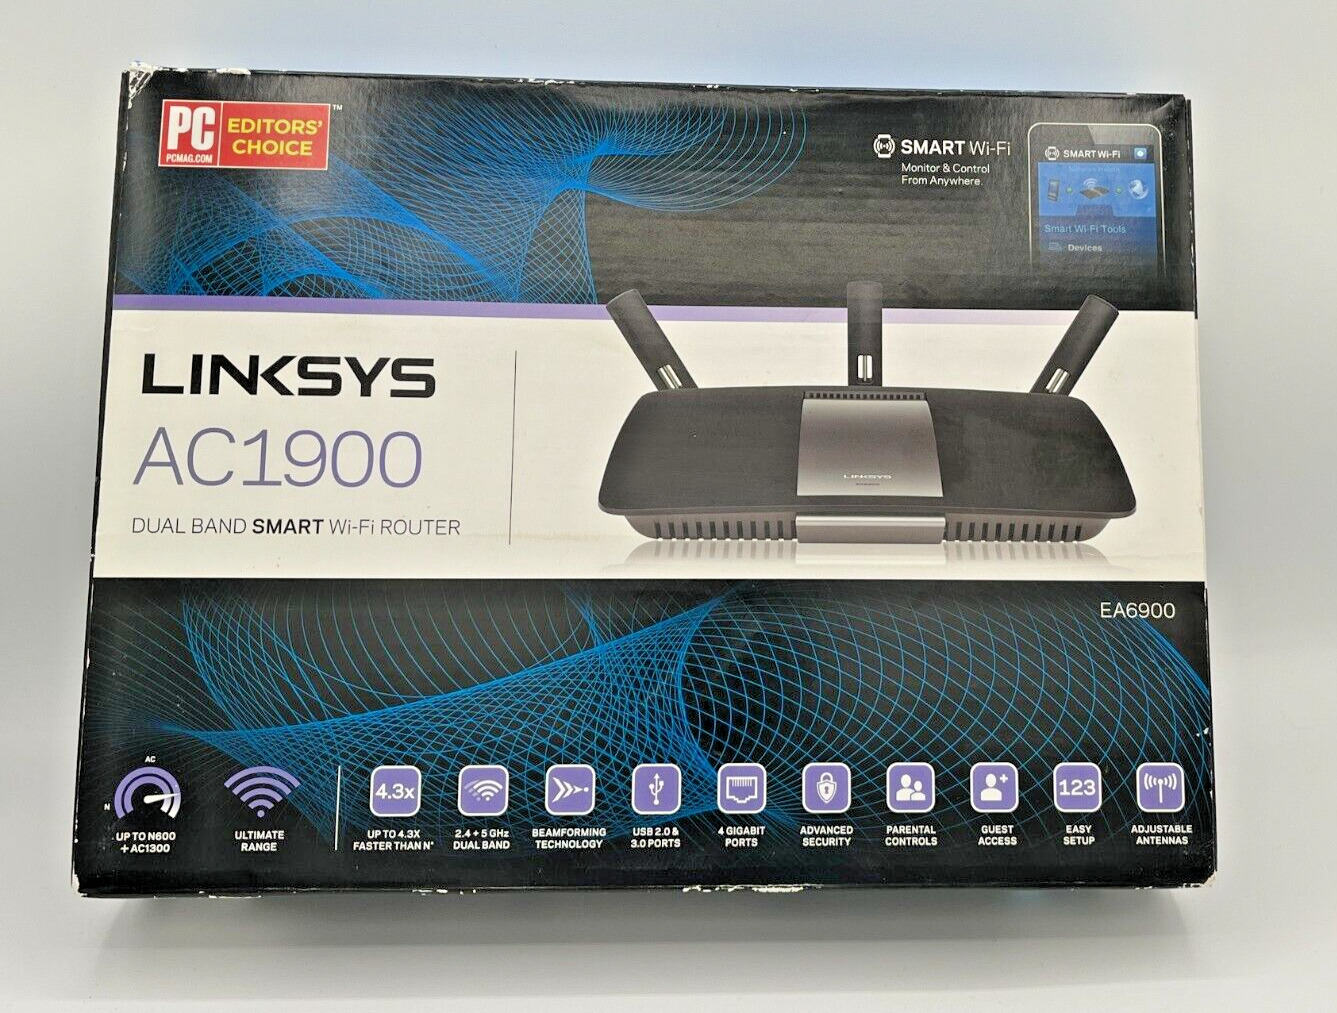 Linksys AC1900 EA6900 Dual Band Smart Wi-Fi Gigabit Router Easy Setup New in Box